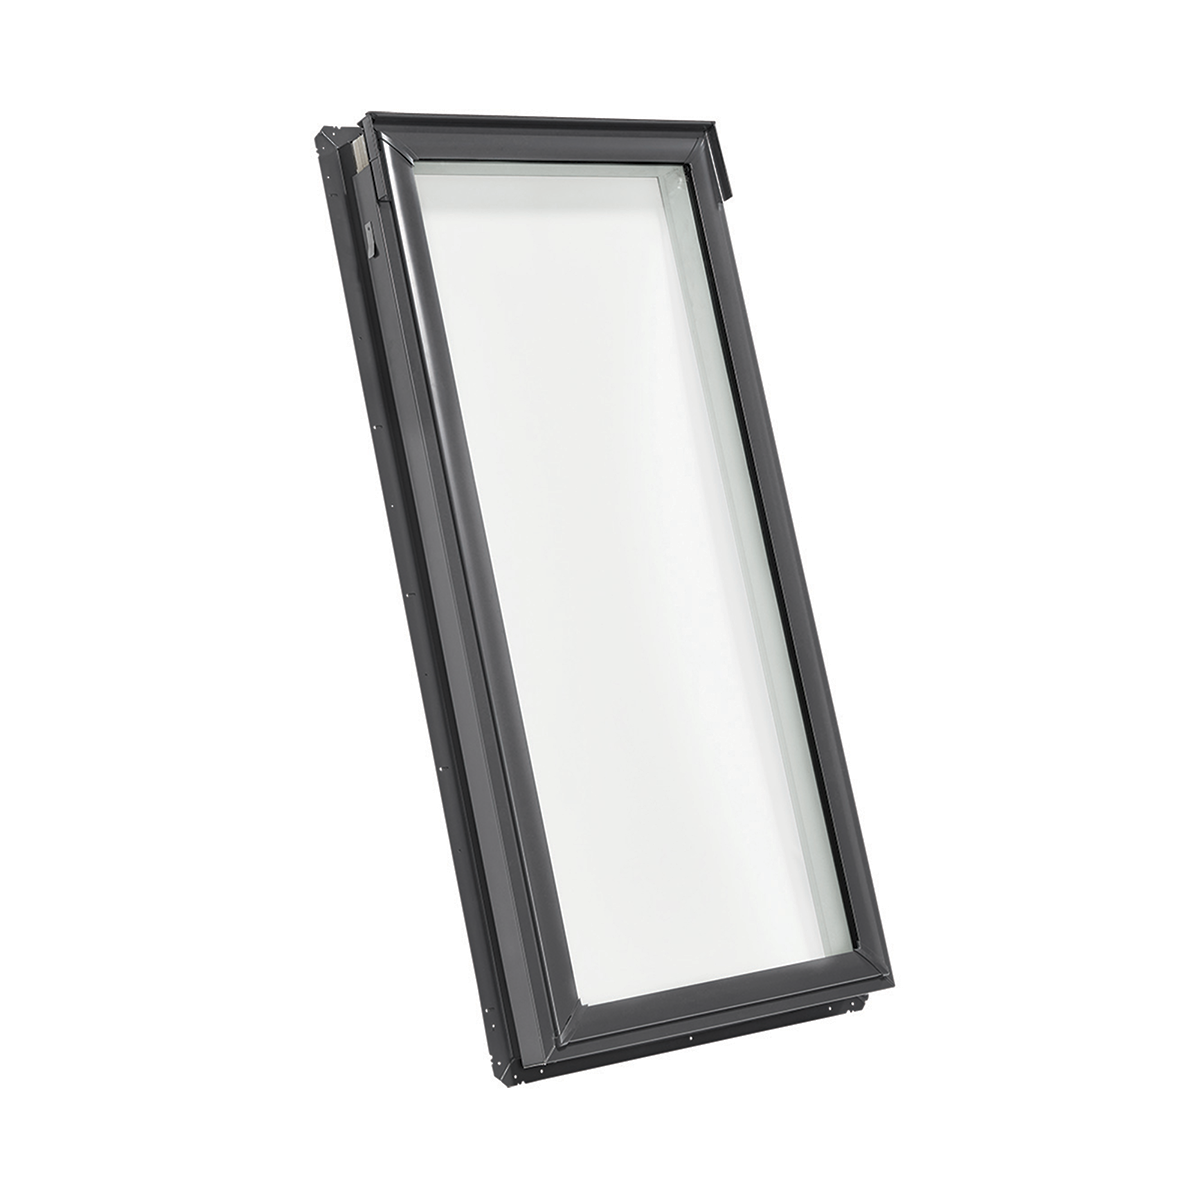 Fixed Deck-Mount Skylight with Laminated Low-E3 Glass - 44-1/4 in. x 26-7/8 in. - FS S01